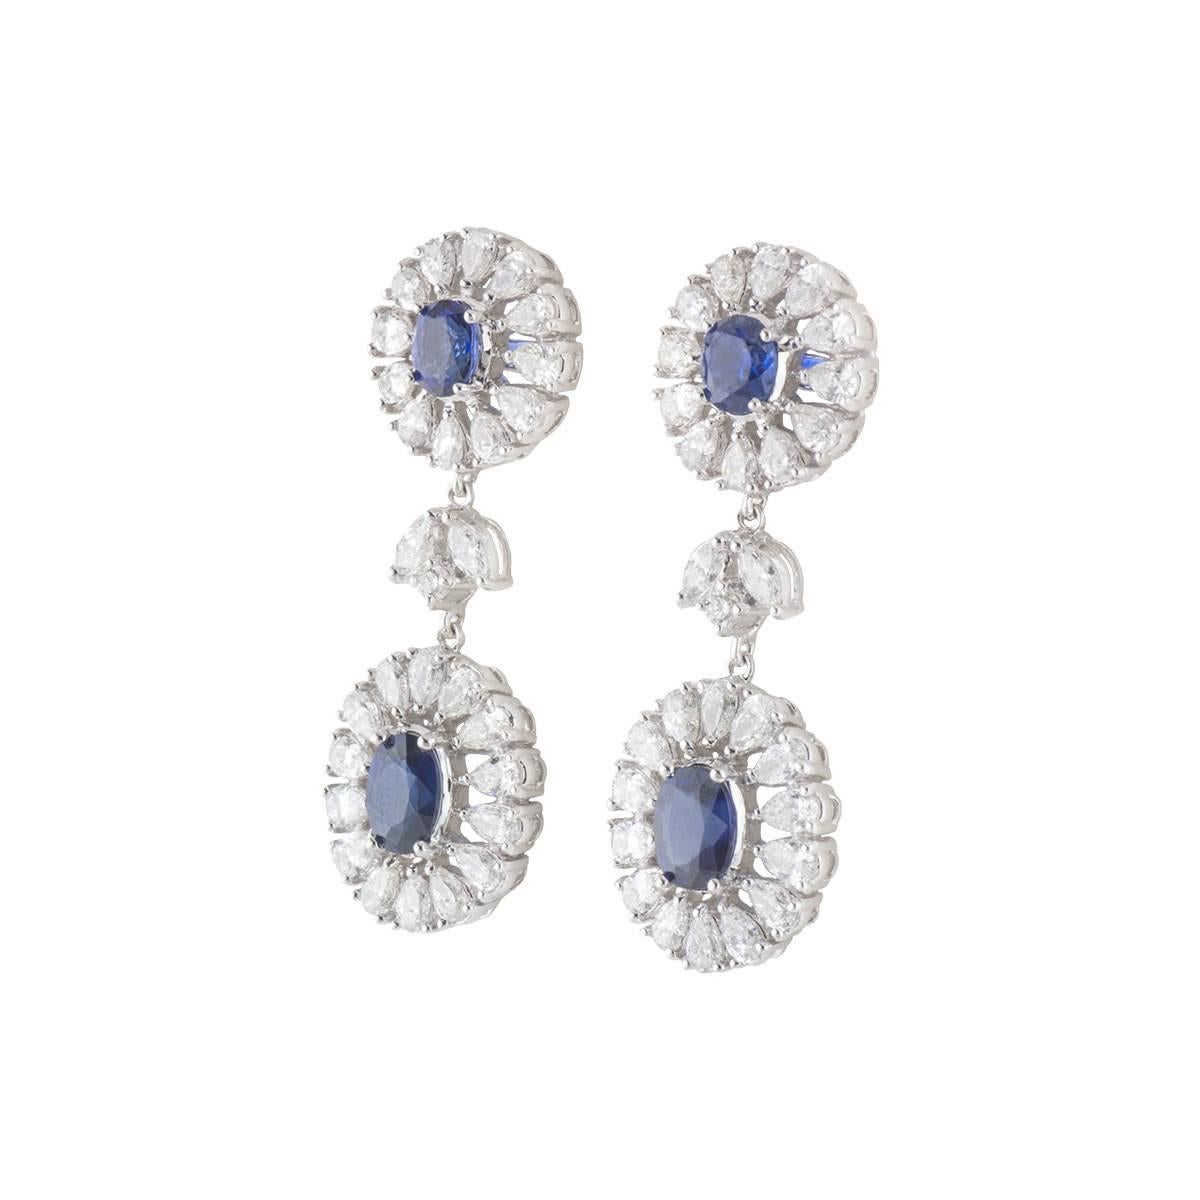 A sparkly pair of 18k white gold diamond and sapphire drop earrings. The earrings each comprise of an open work circular motif with an oval cut sapphire and a halo of 12 pear cut diamonds. Complementing the motif is another open work oval motif with